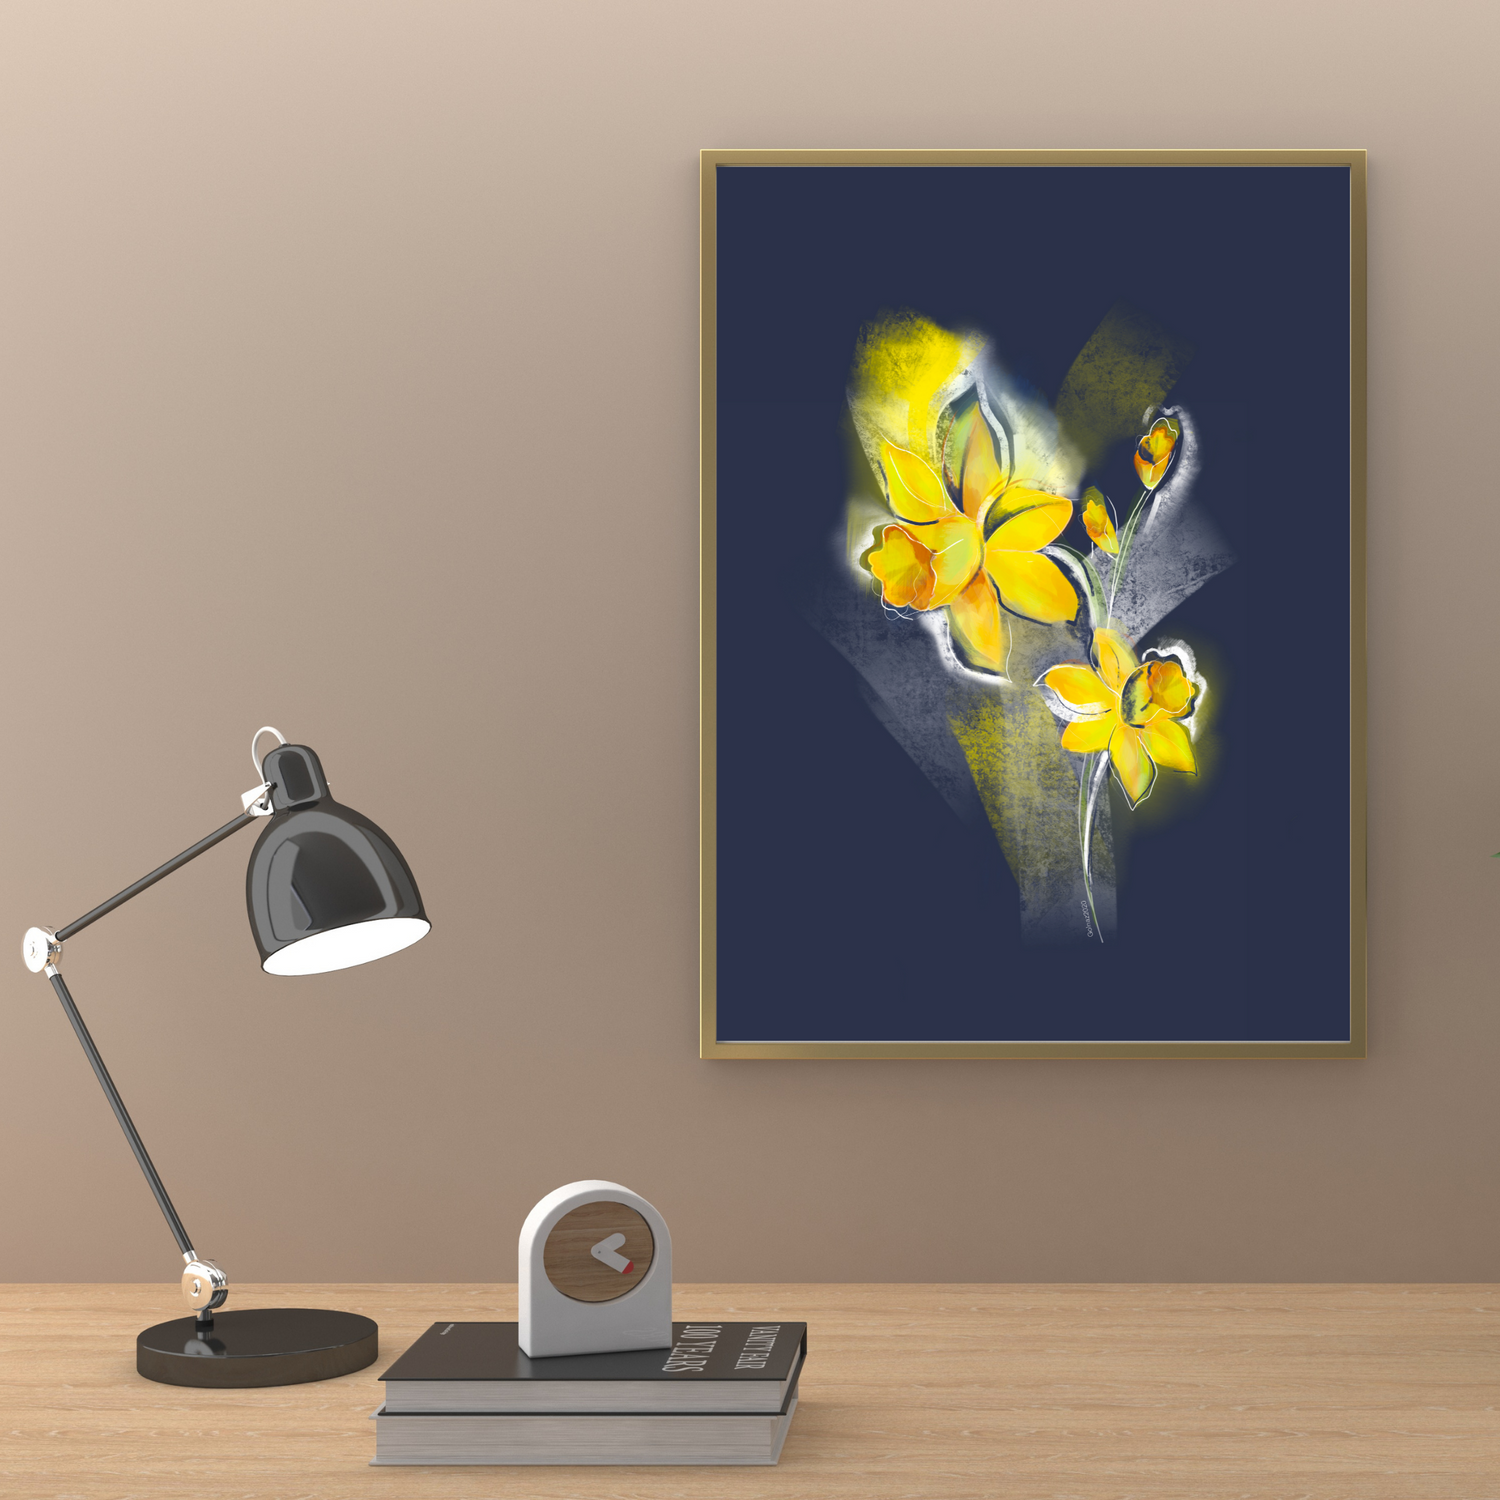 An example of the Daffodil painting by ArisaTeam over a desk with a lamp and books